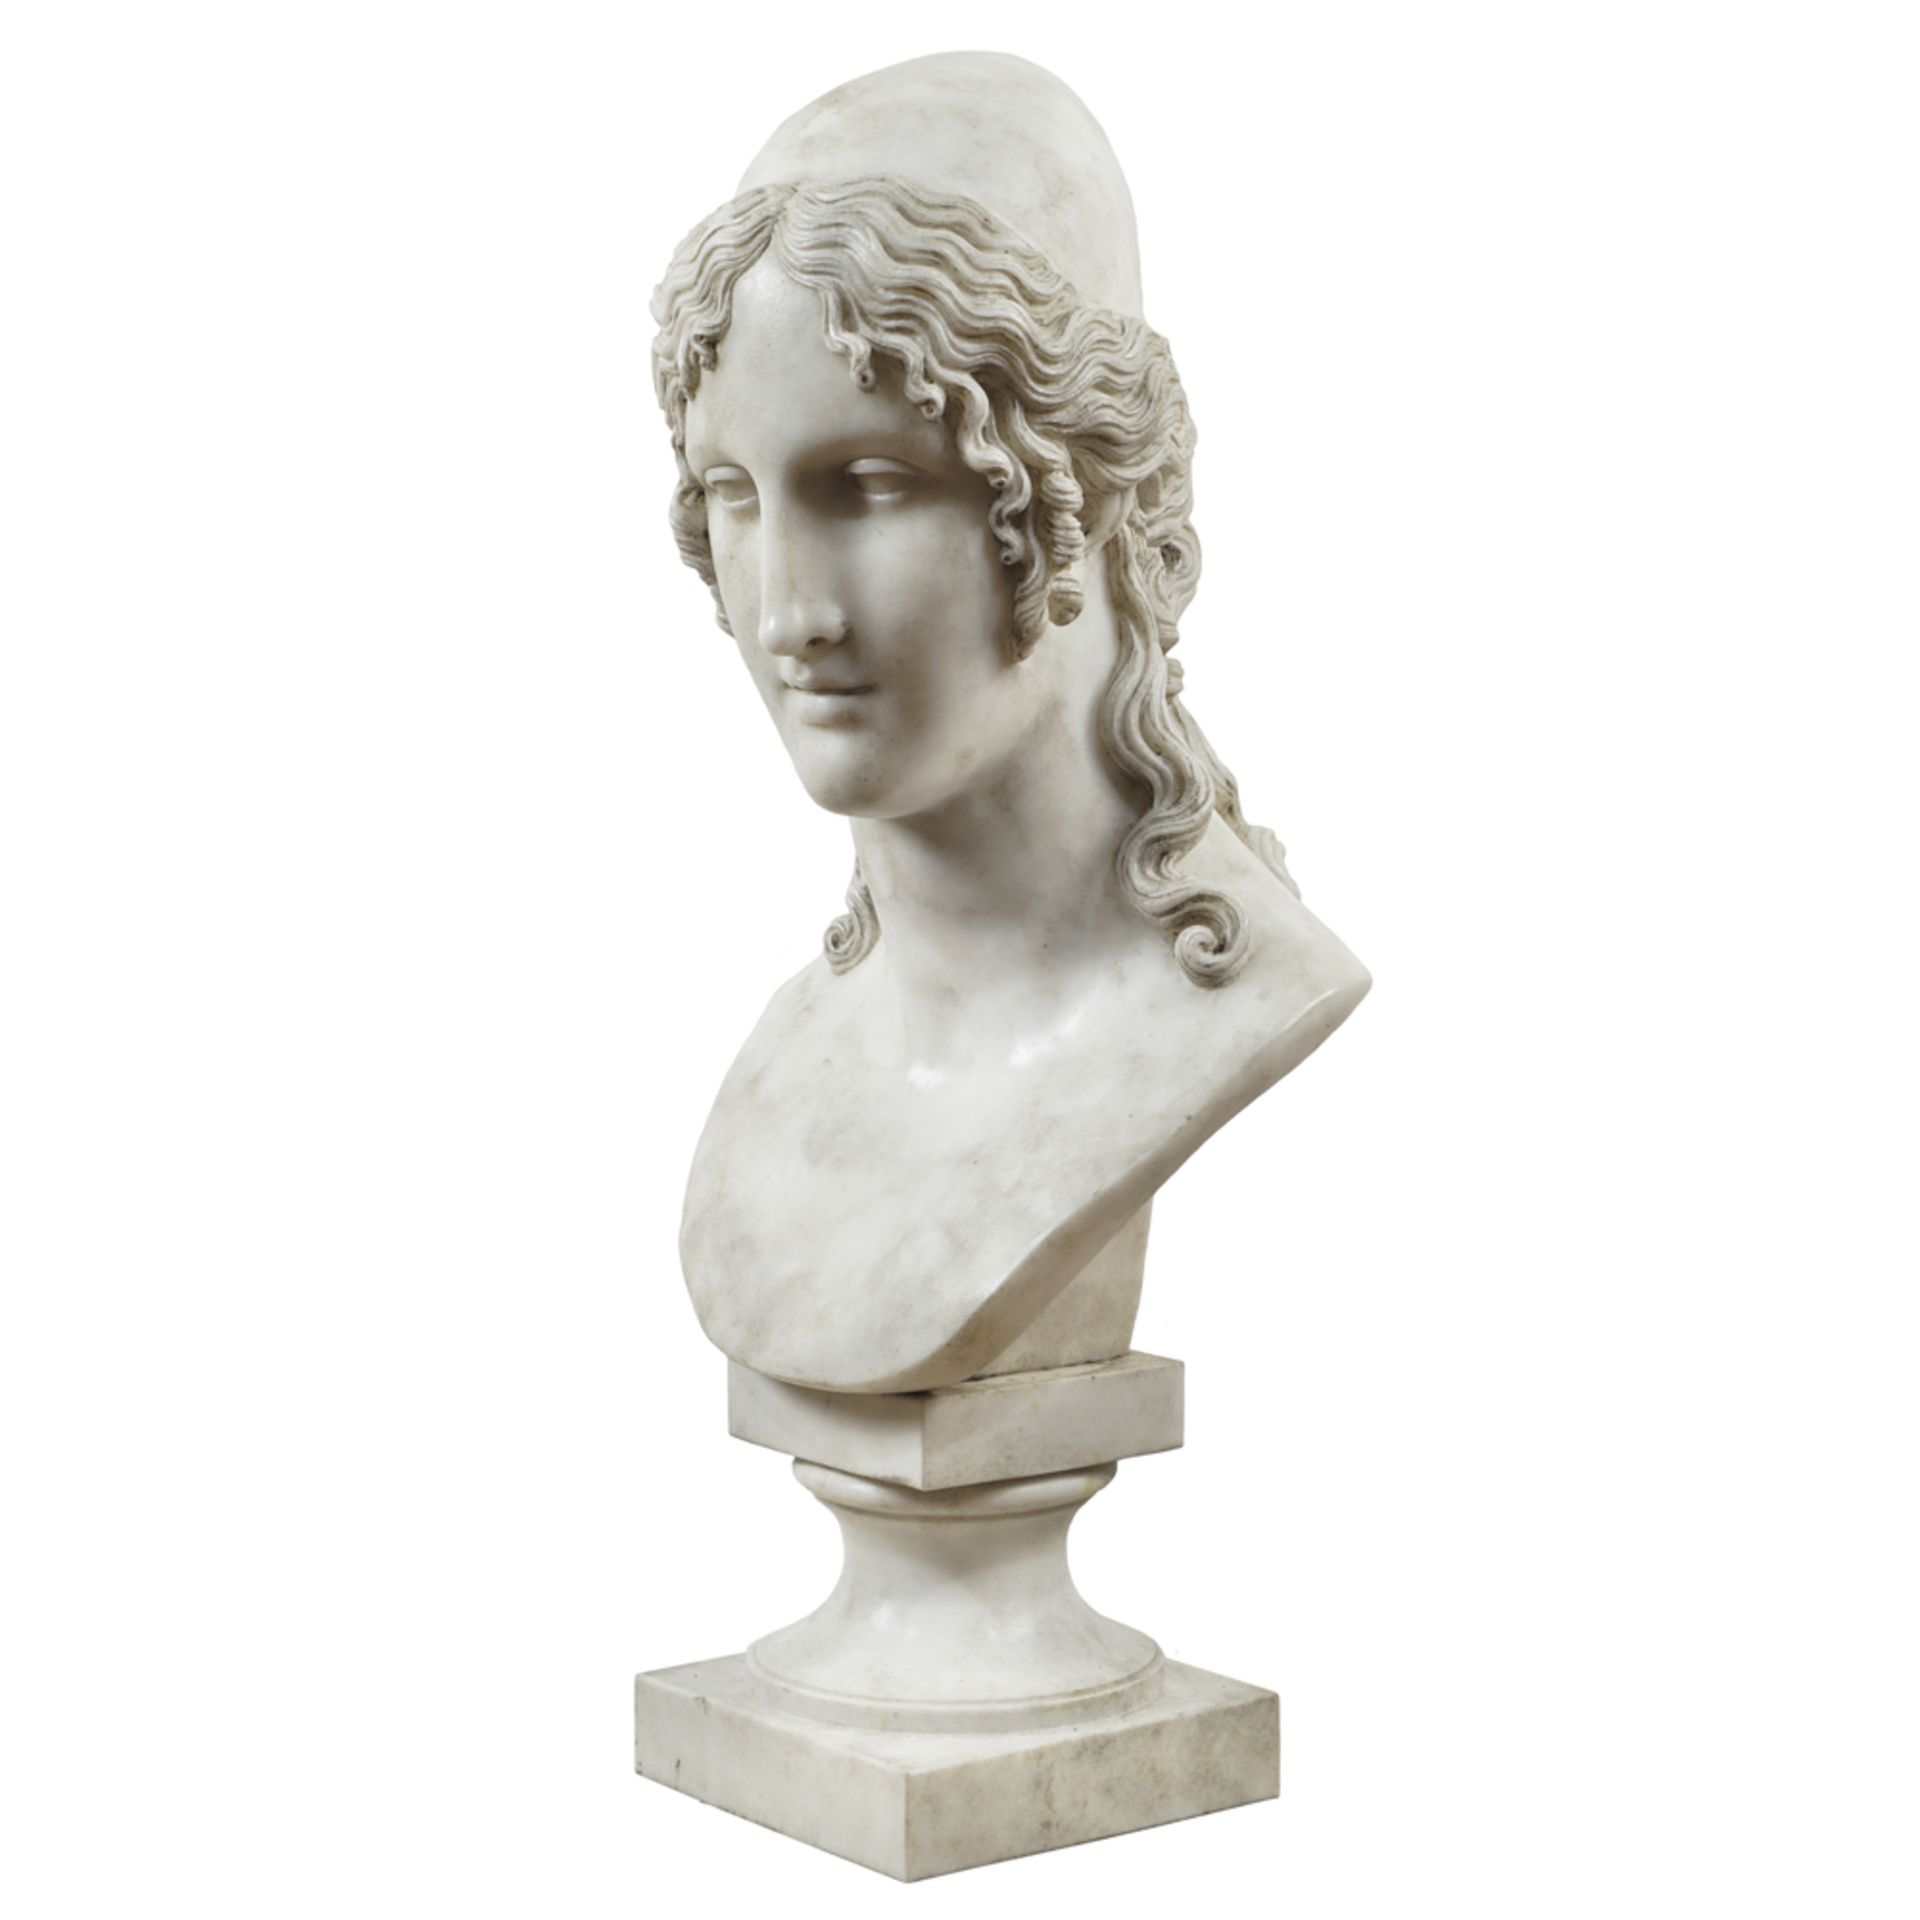 White marble sculpture 20th century 81x37x30 cm. - Image 2 of 3